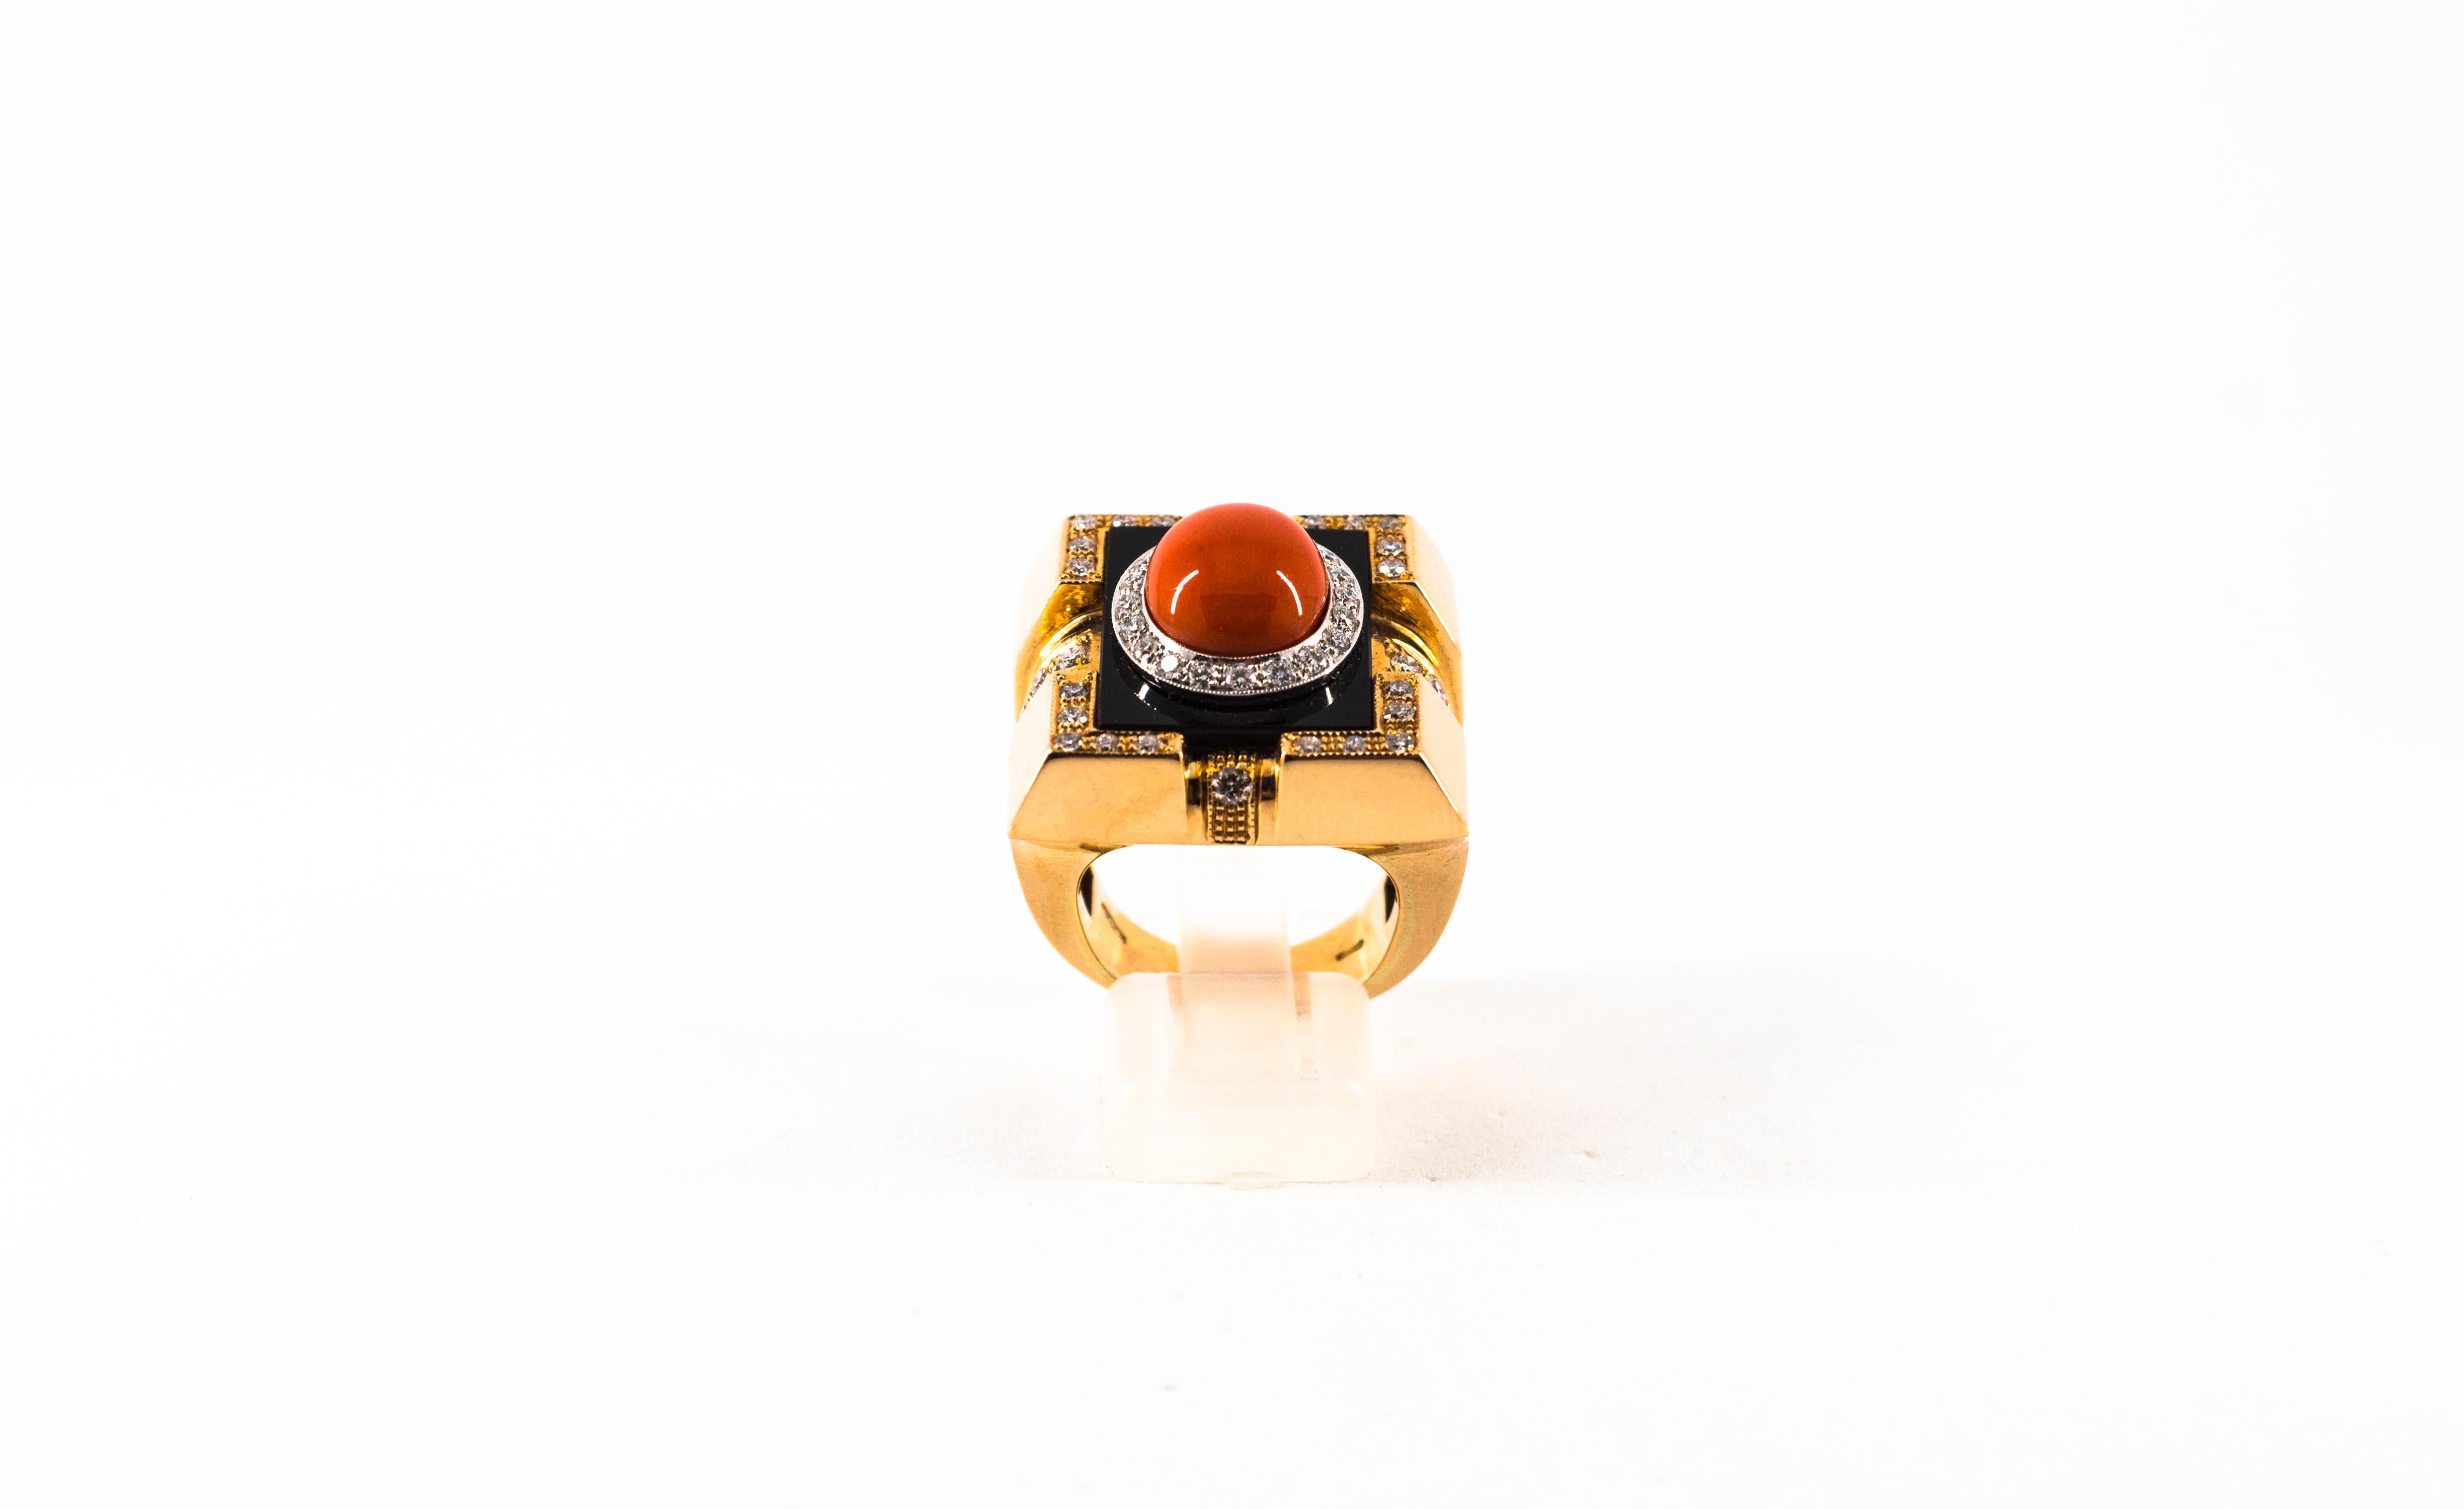 This Ring is made of 14K Yellow Gold.
This Ring has 1.00 Carats of White Diamonds.
This Ring has Red Mediterranean (Sardinia, Italy) Coral.
This Ring has also Onyx.

Size ITA: 14 USA: 7 

We're a workshop so every piece is handmade, customizable and